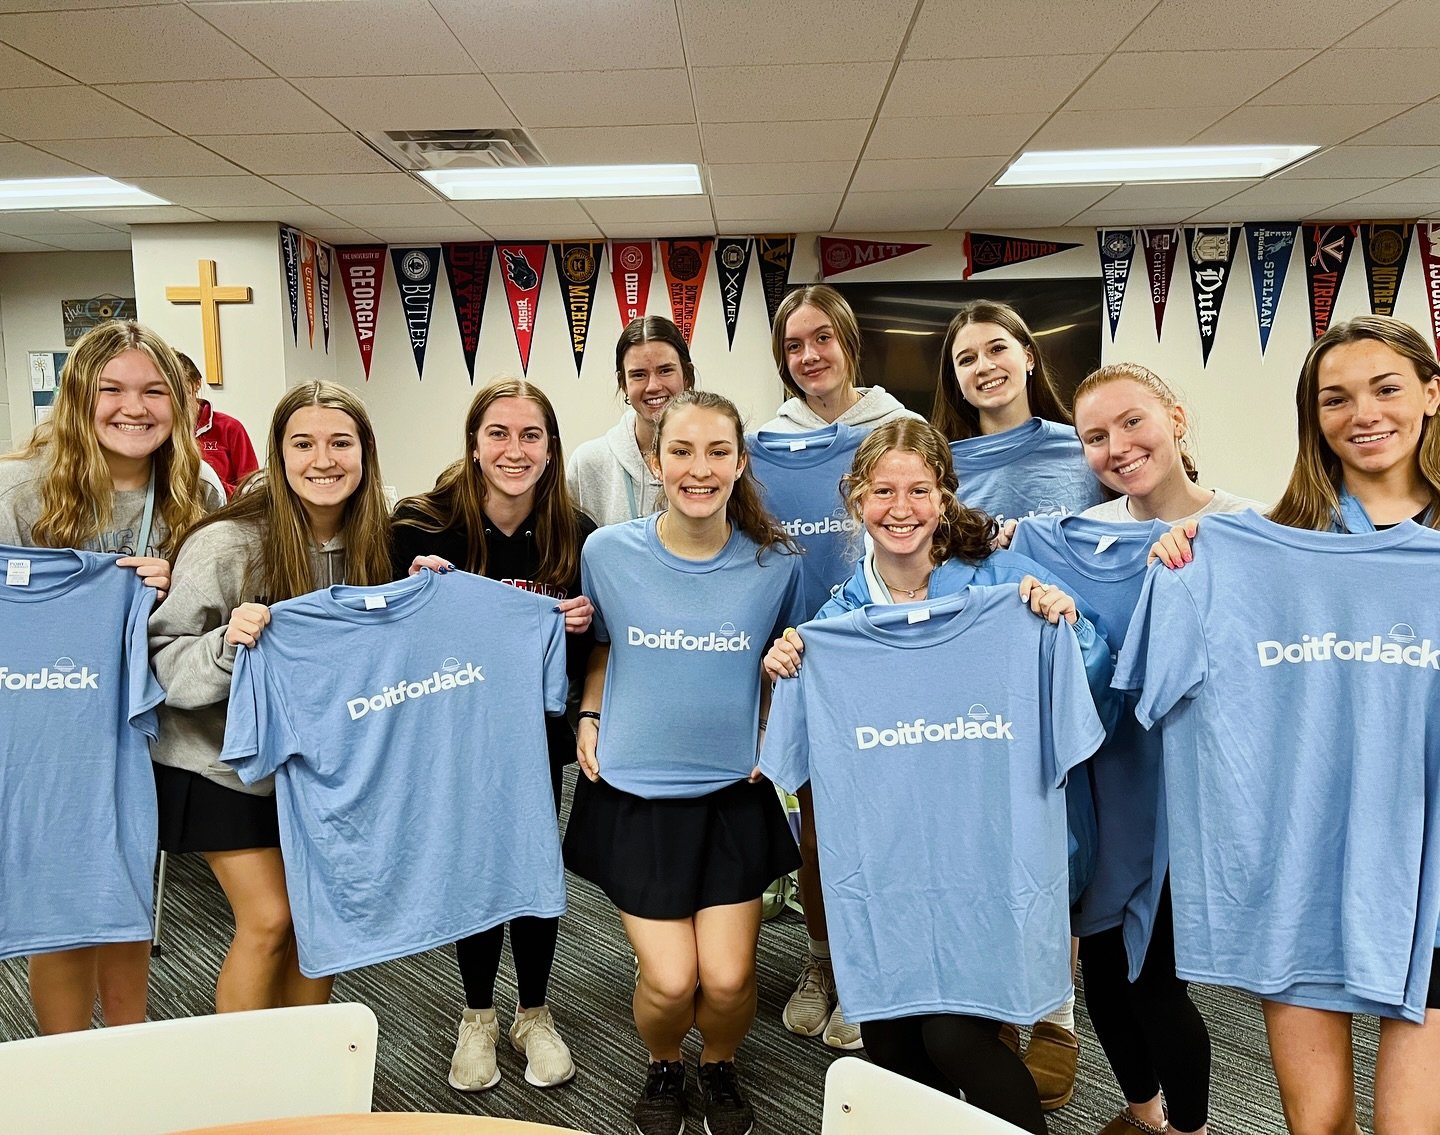 Mount Notre Dame&rsquo;s Youth Philanthropy Council is a large group of students who strive to make the world a better place by choosing organizations and presenting them to win a grant for the non-profit. 

One group of girls in the council chose DO